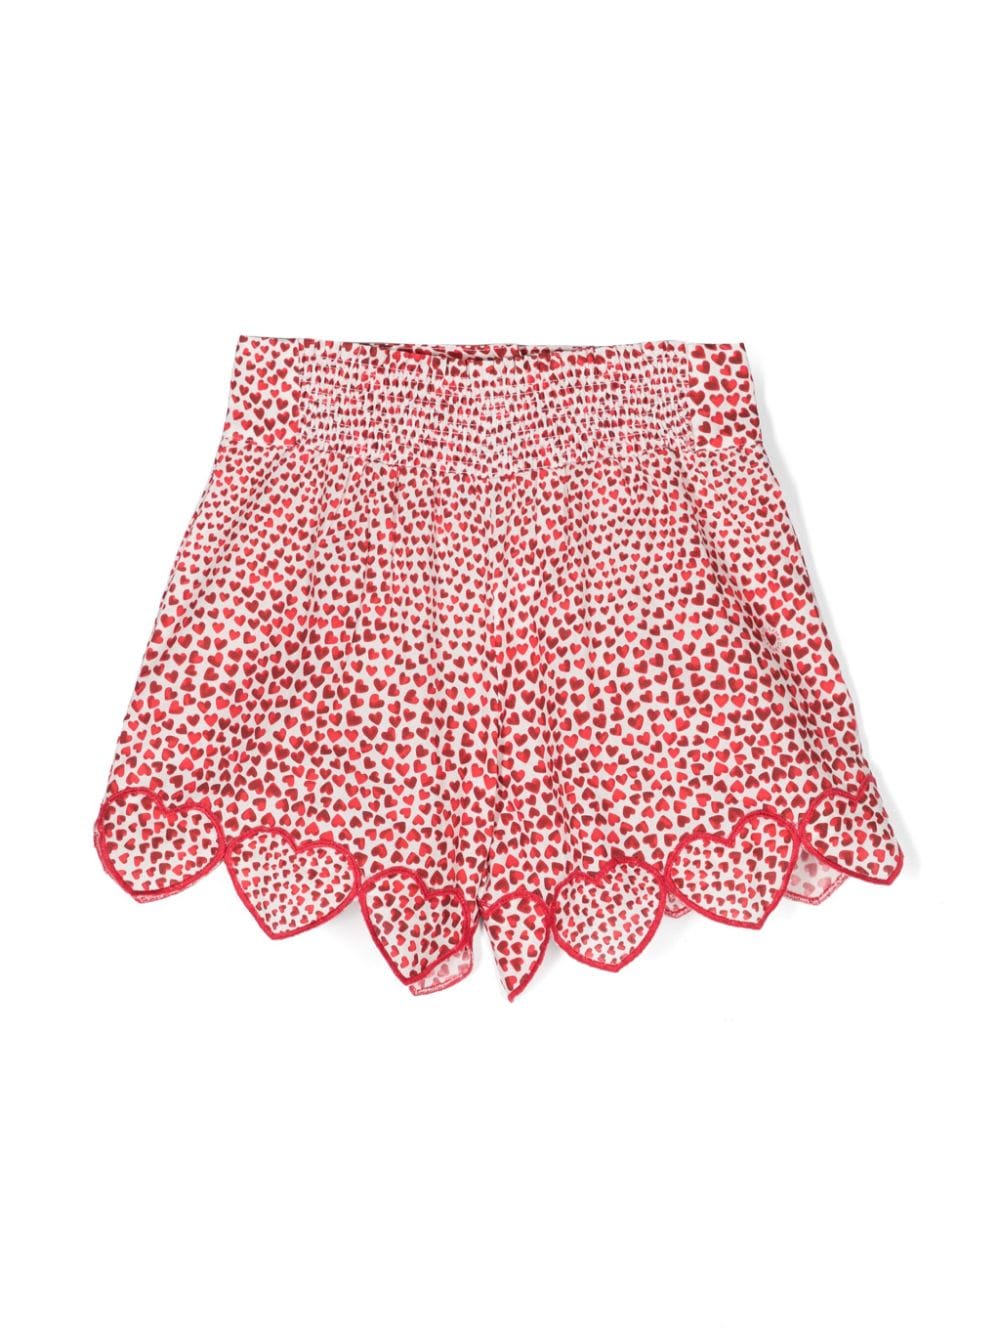 Red Bermuda shorts for girls with hearts